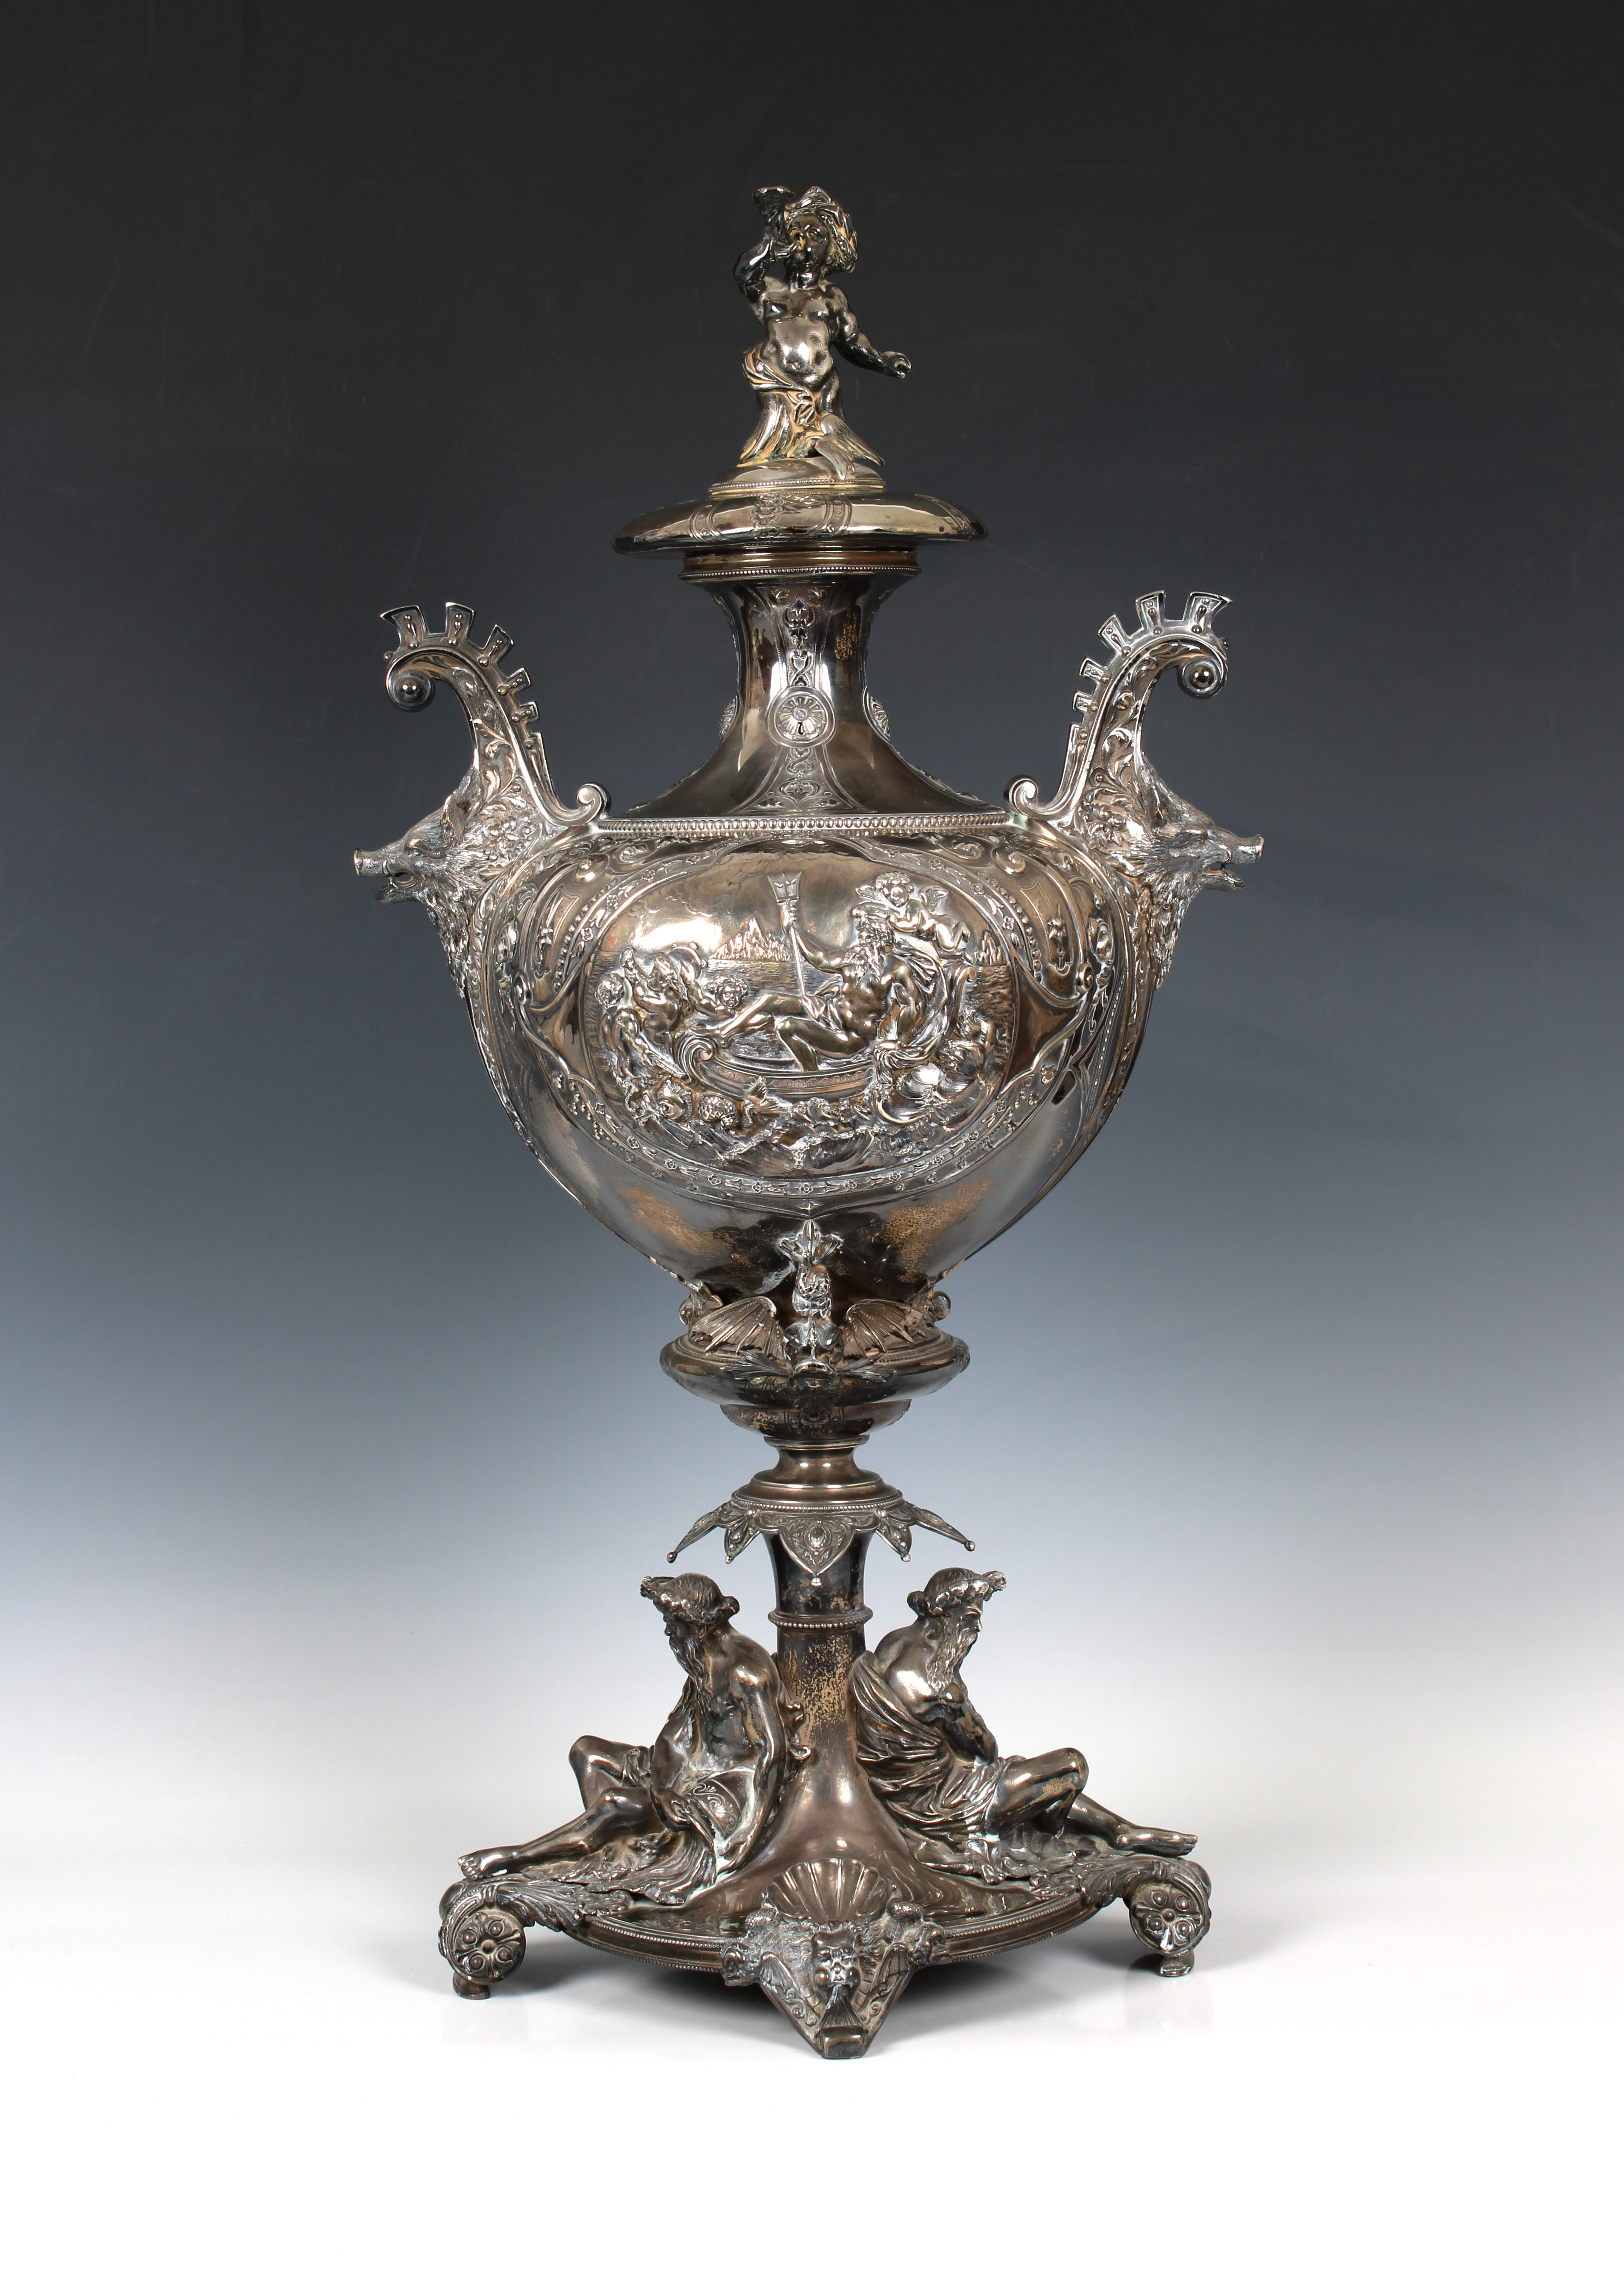 A large and impressive free standing George V heavy silver centrepiece urn / trophy featuring Poseid